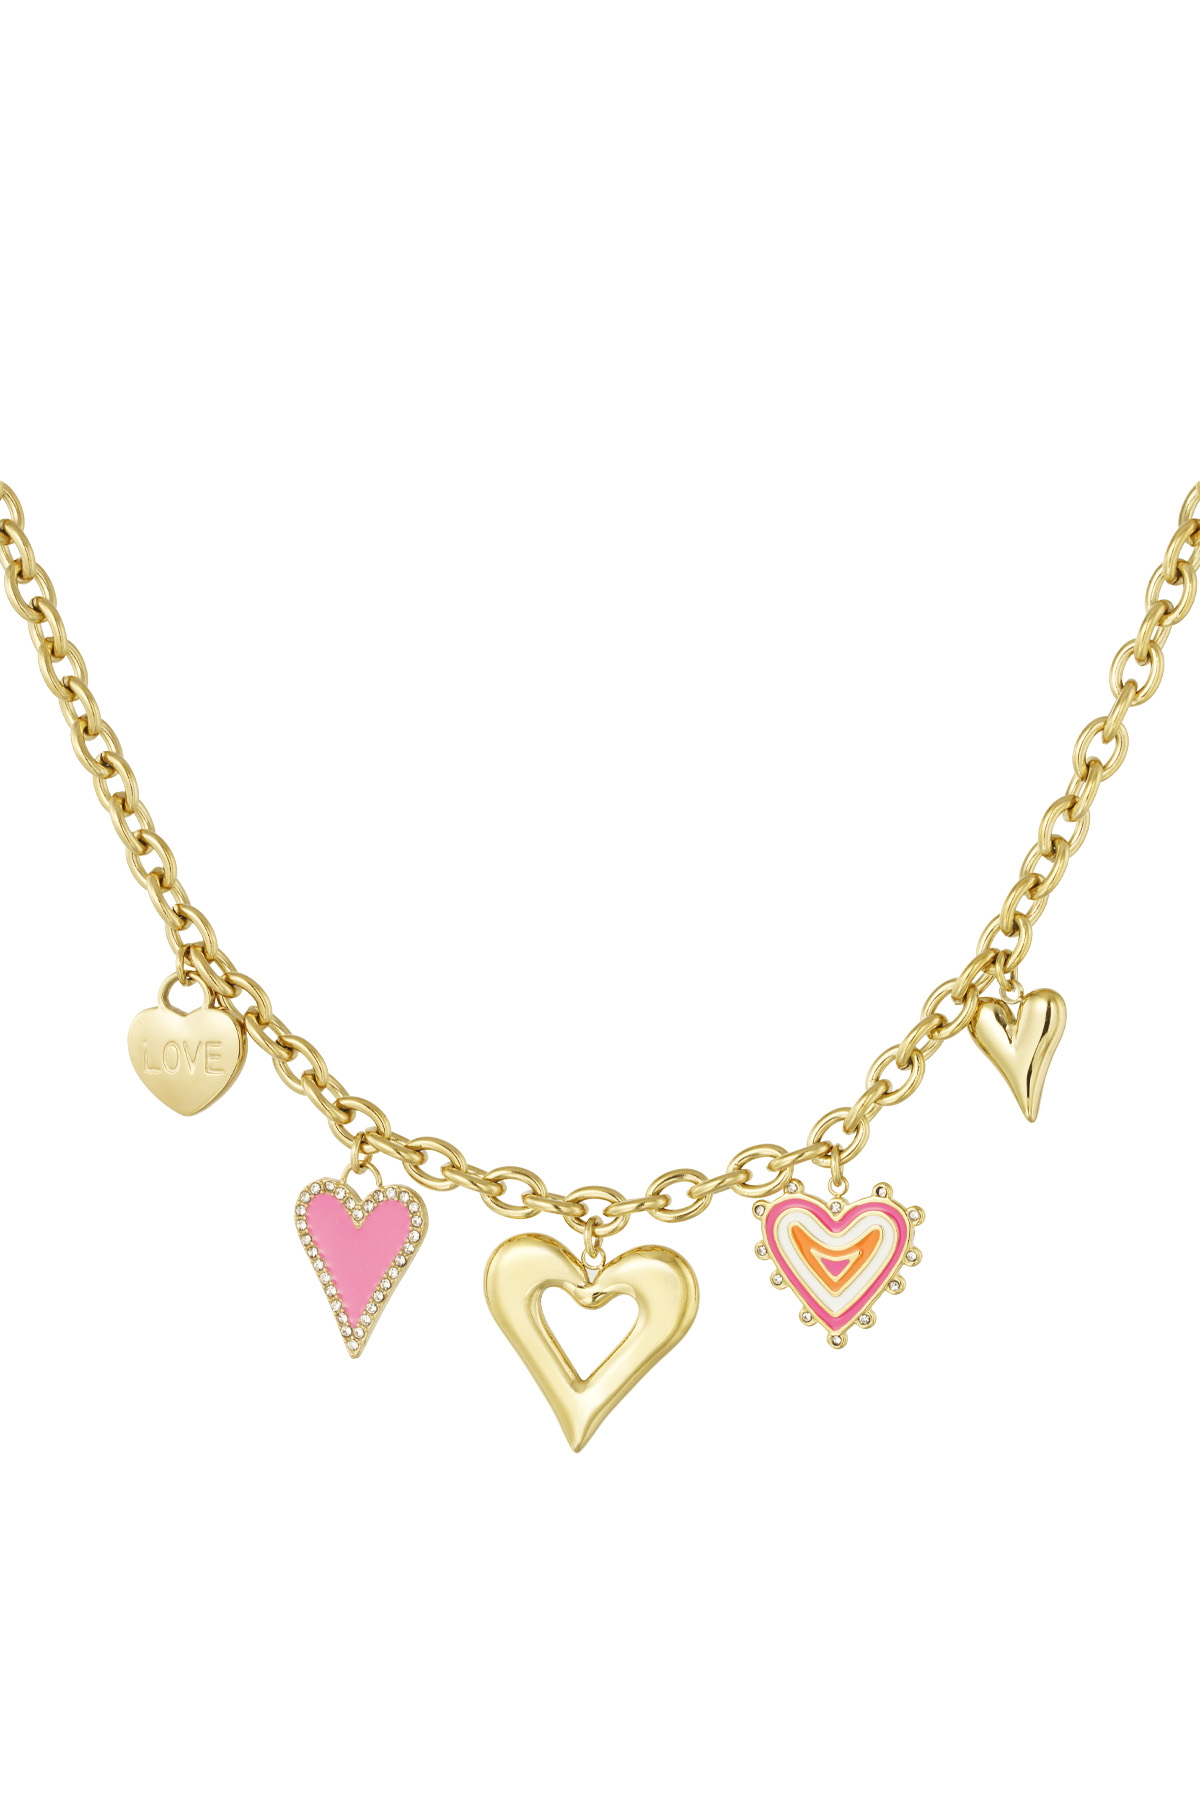 Charm necklace love always wins - gold h5 